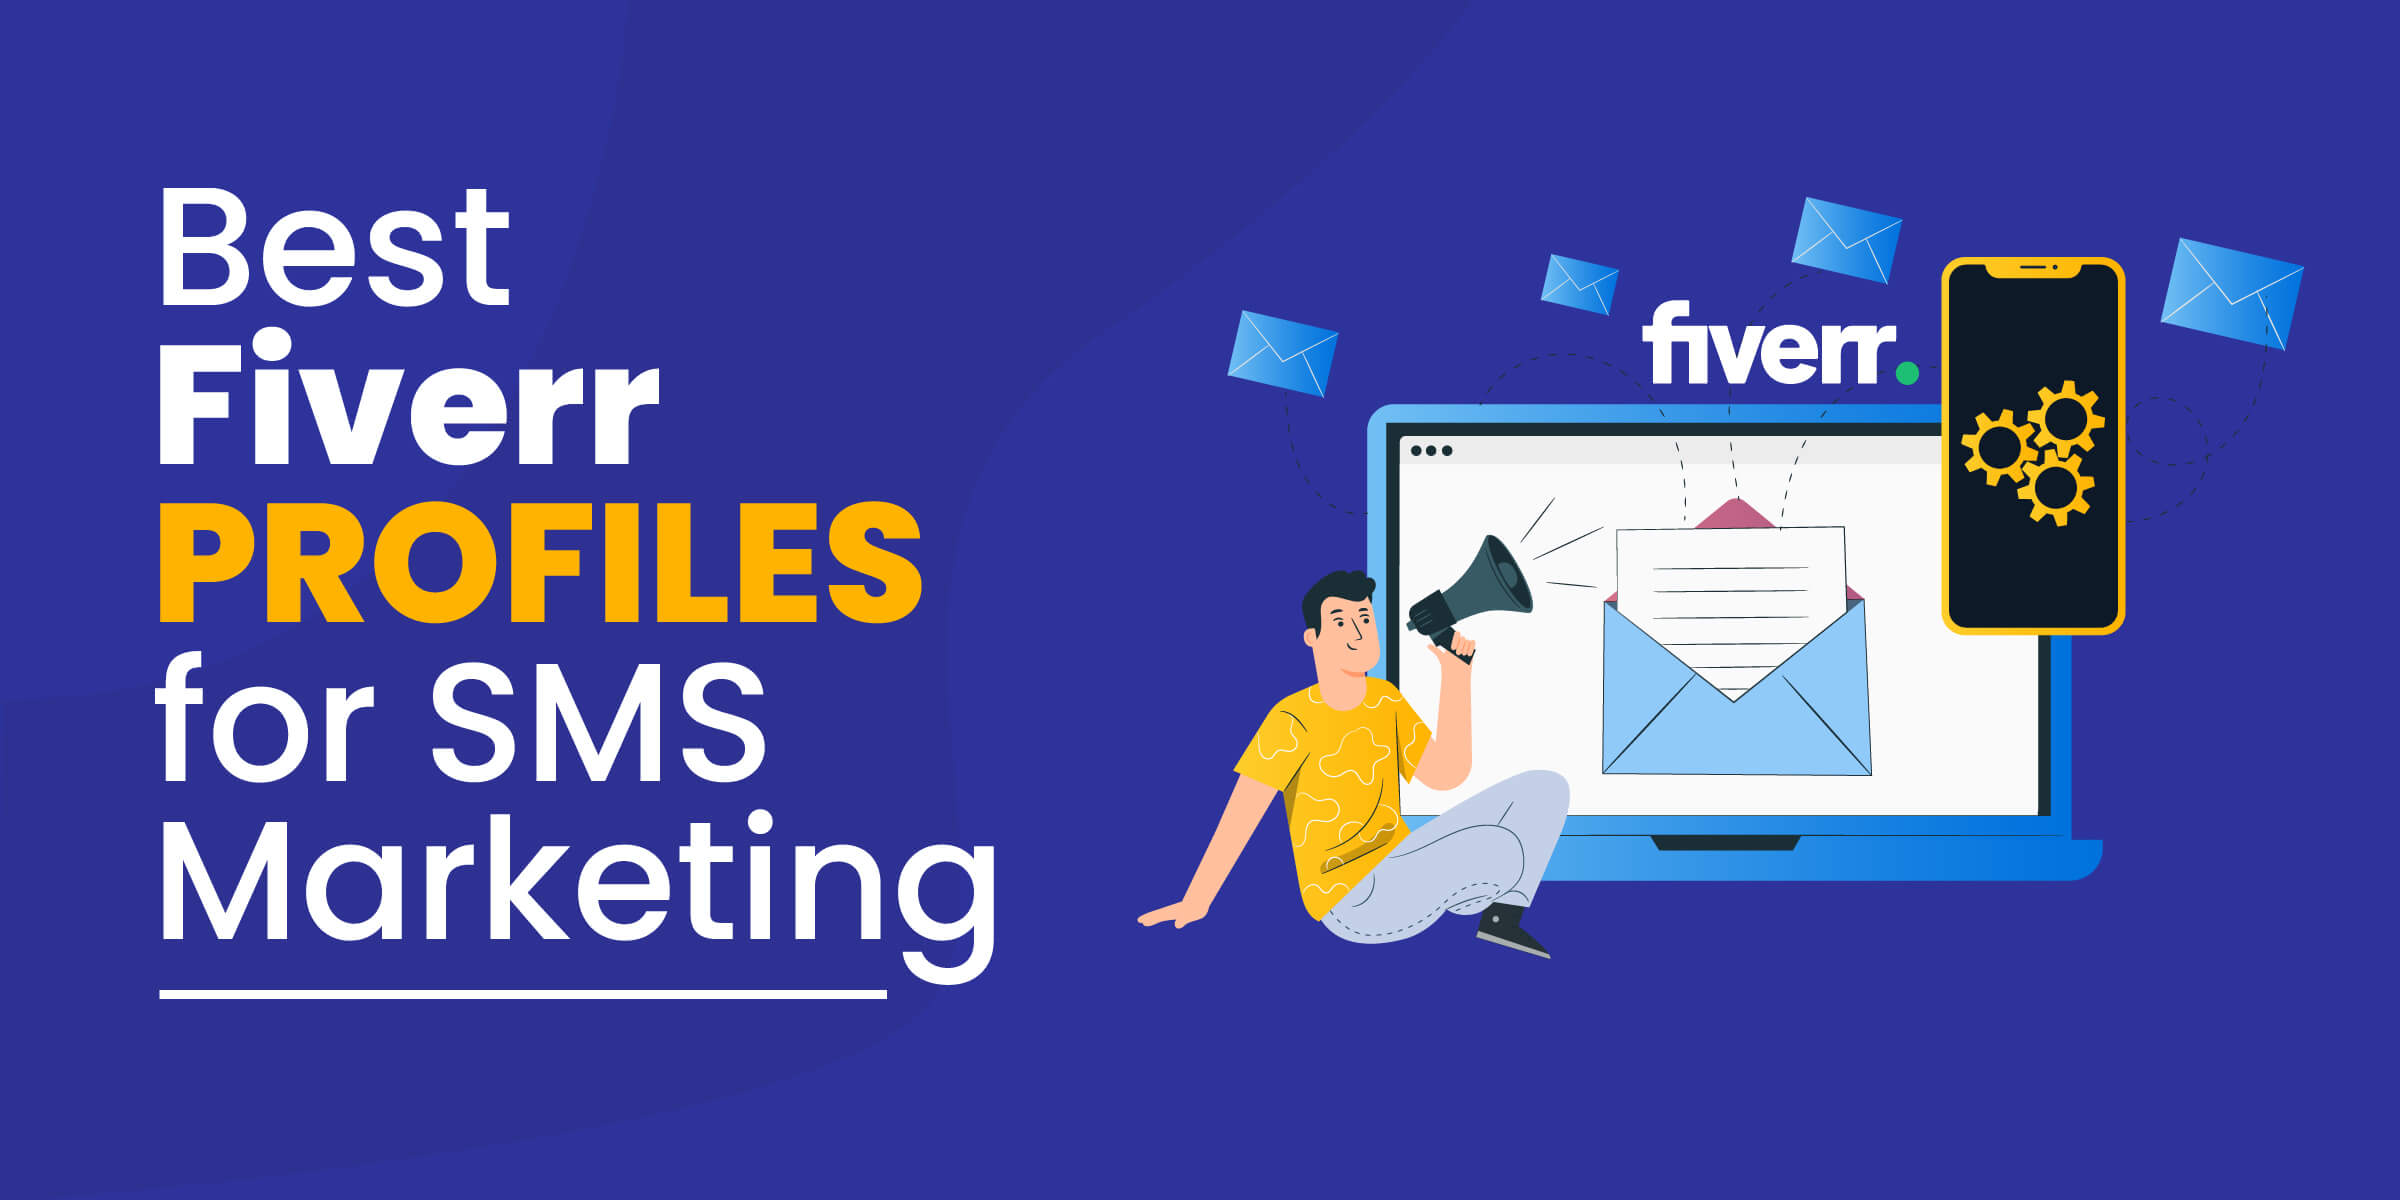 Best Fiverr Profiles for SMS Marketing